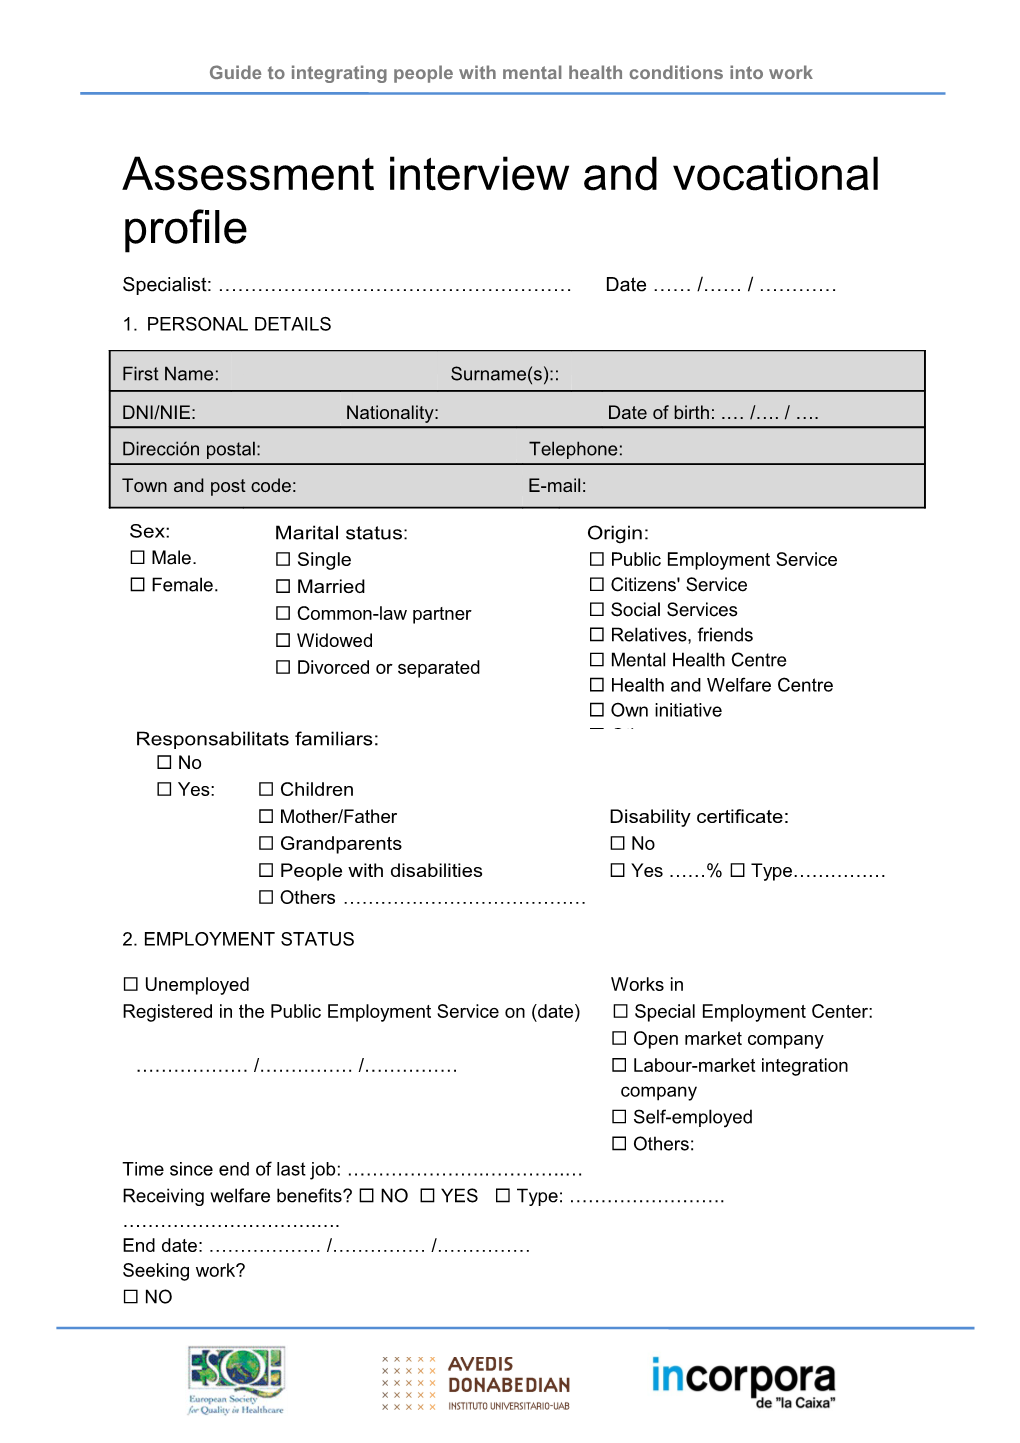 Assessment Interview and Vocational Profile